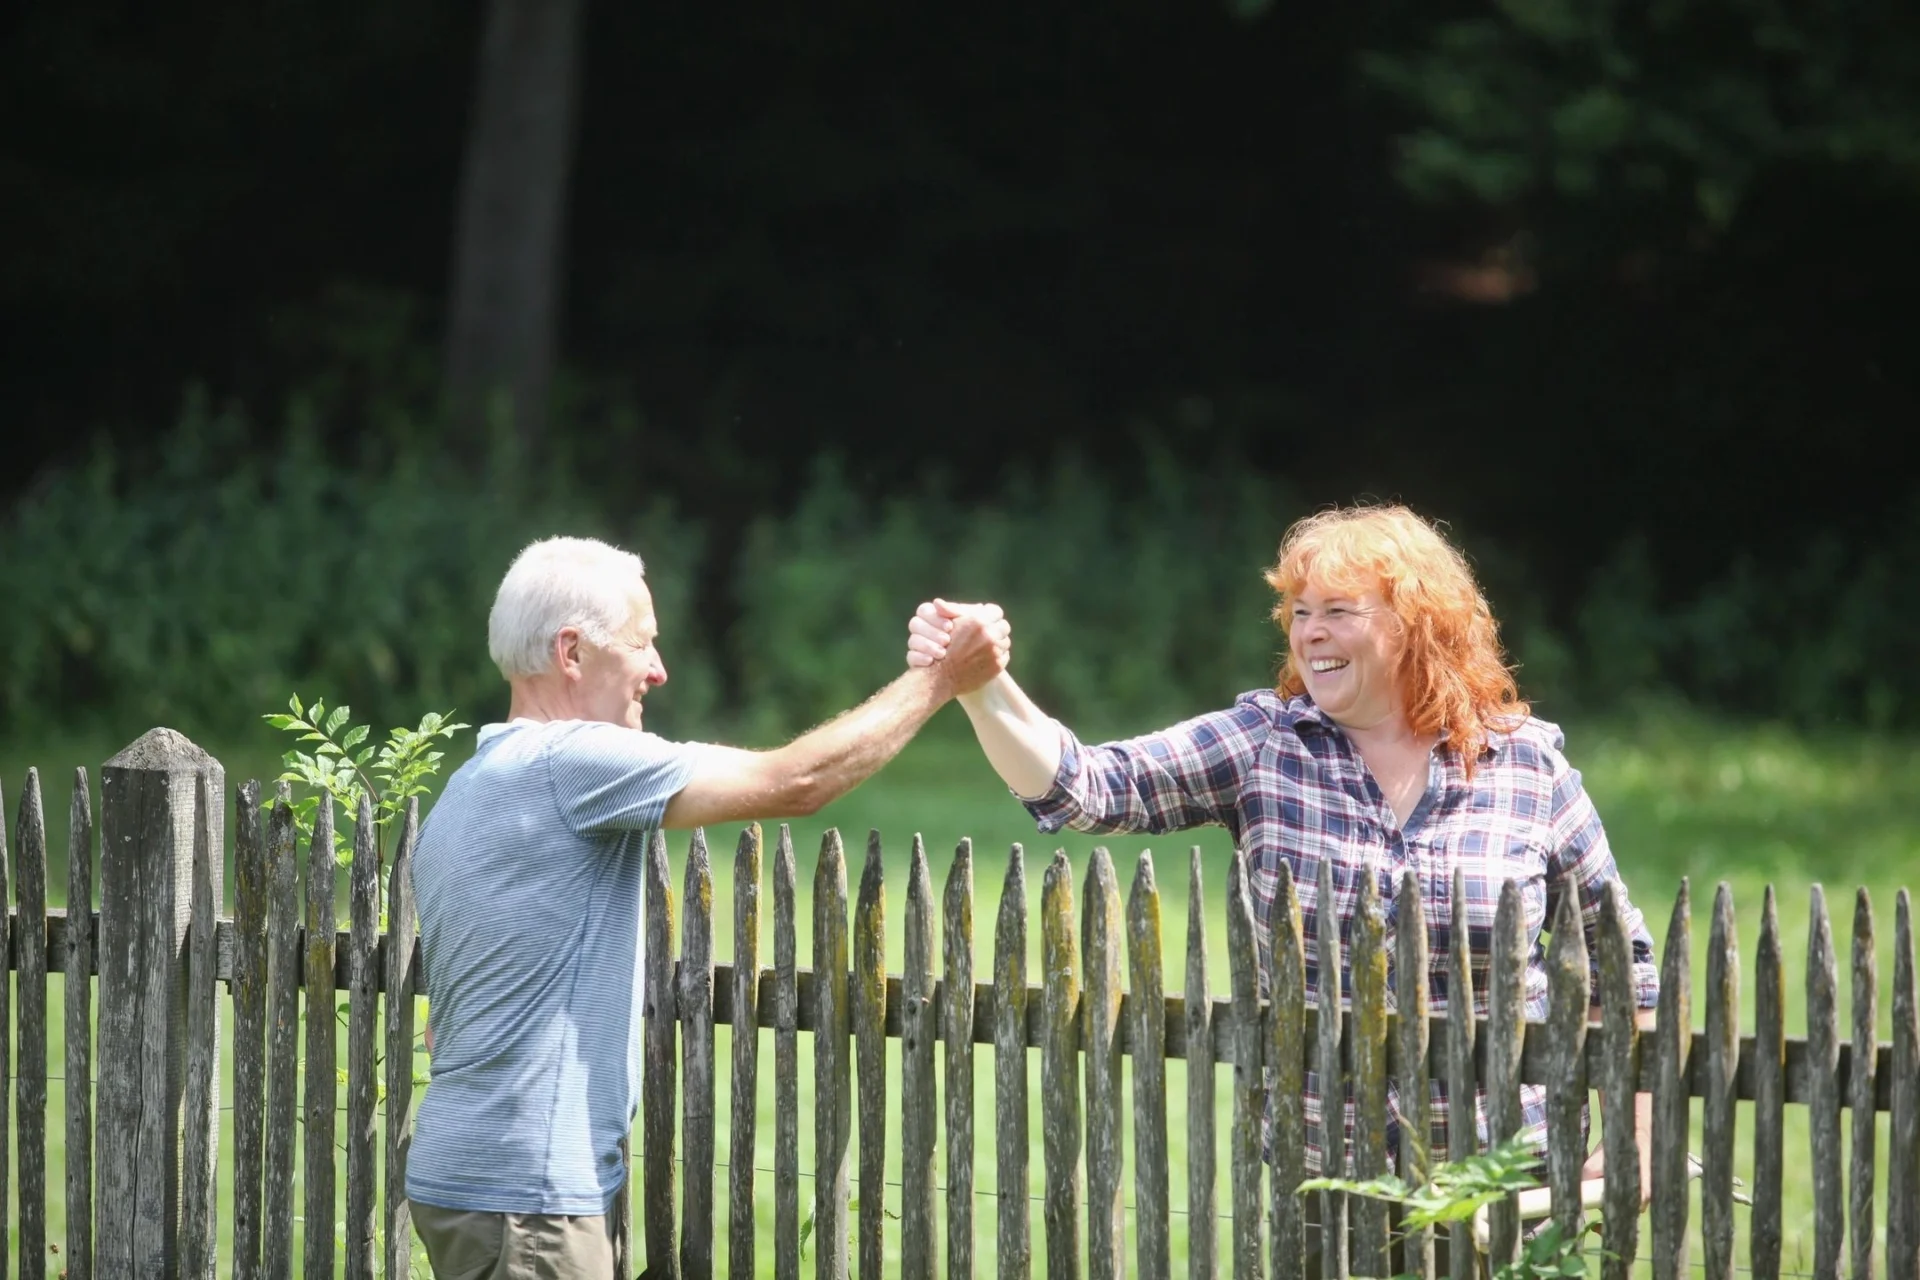 Two people holding hands in front of a fence.